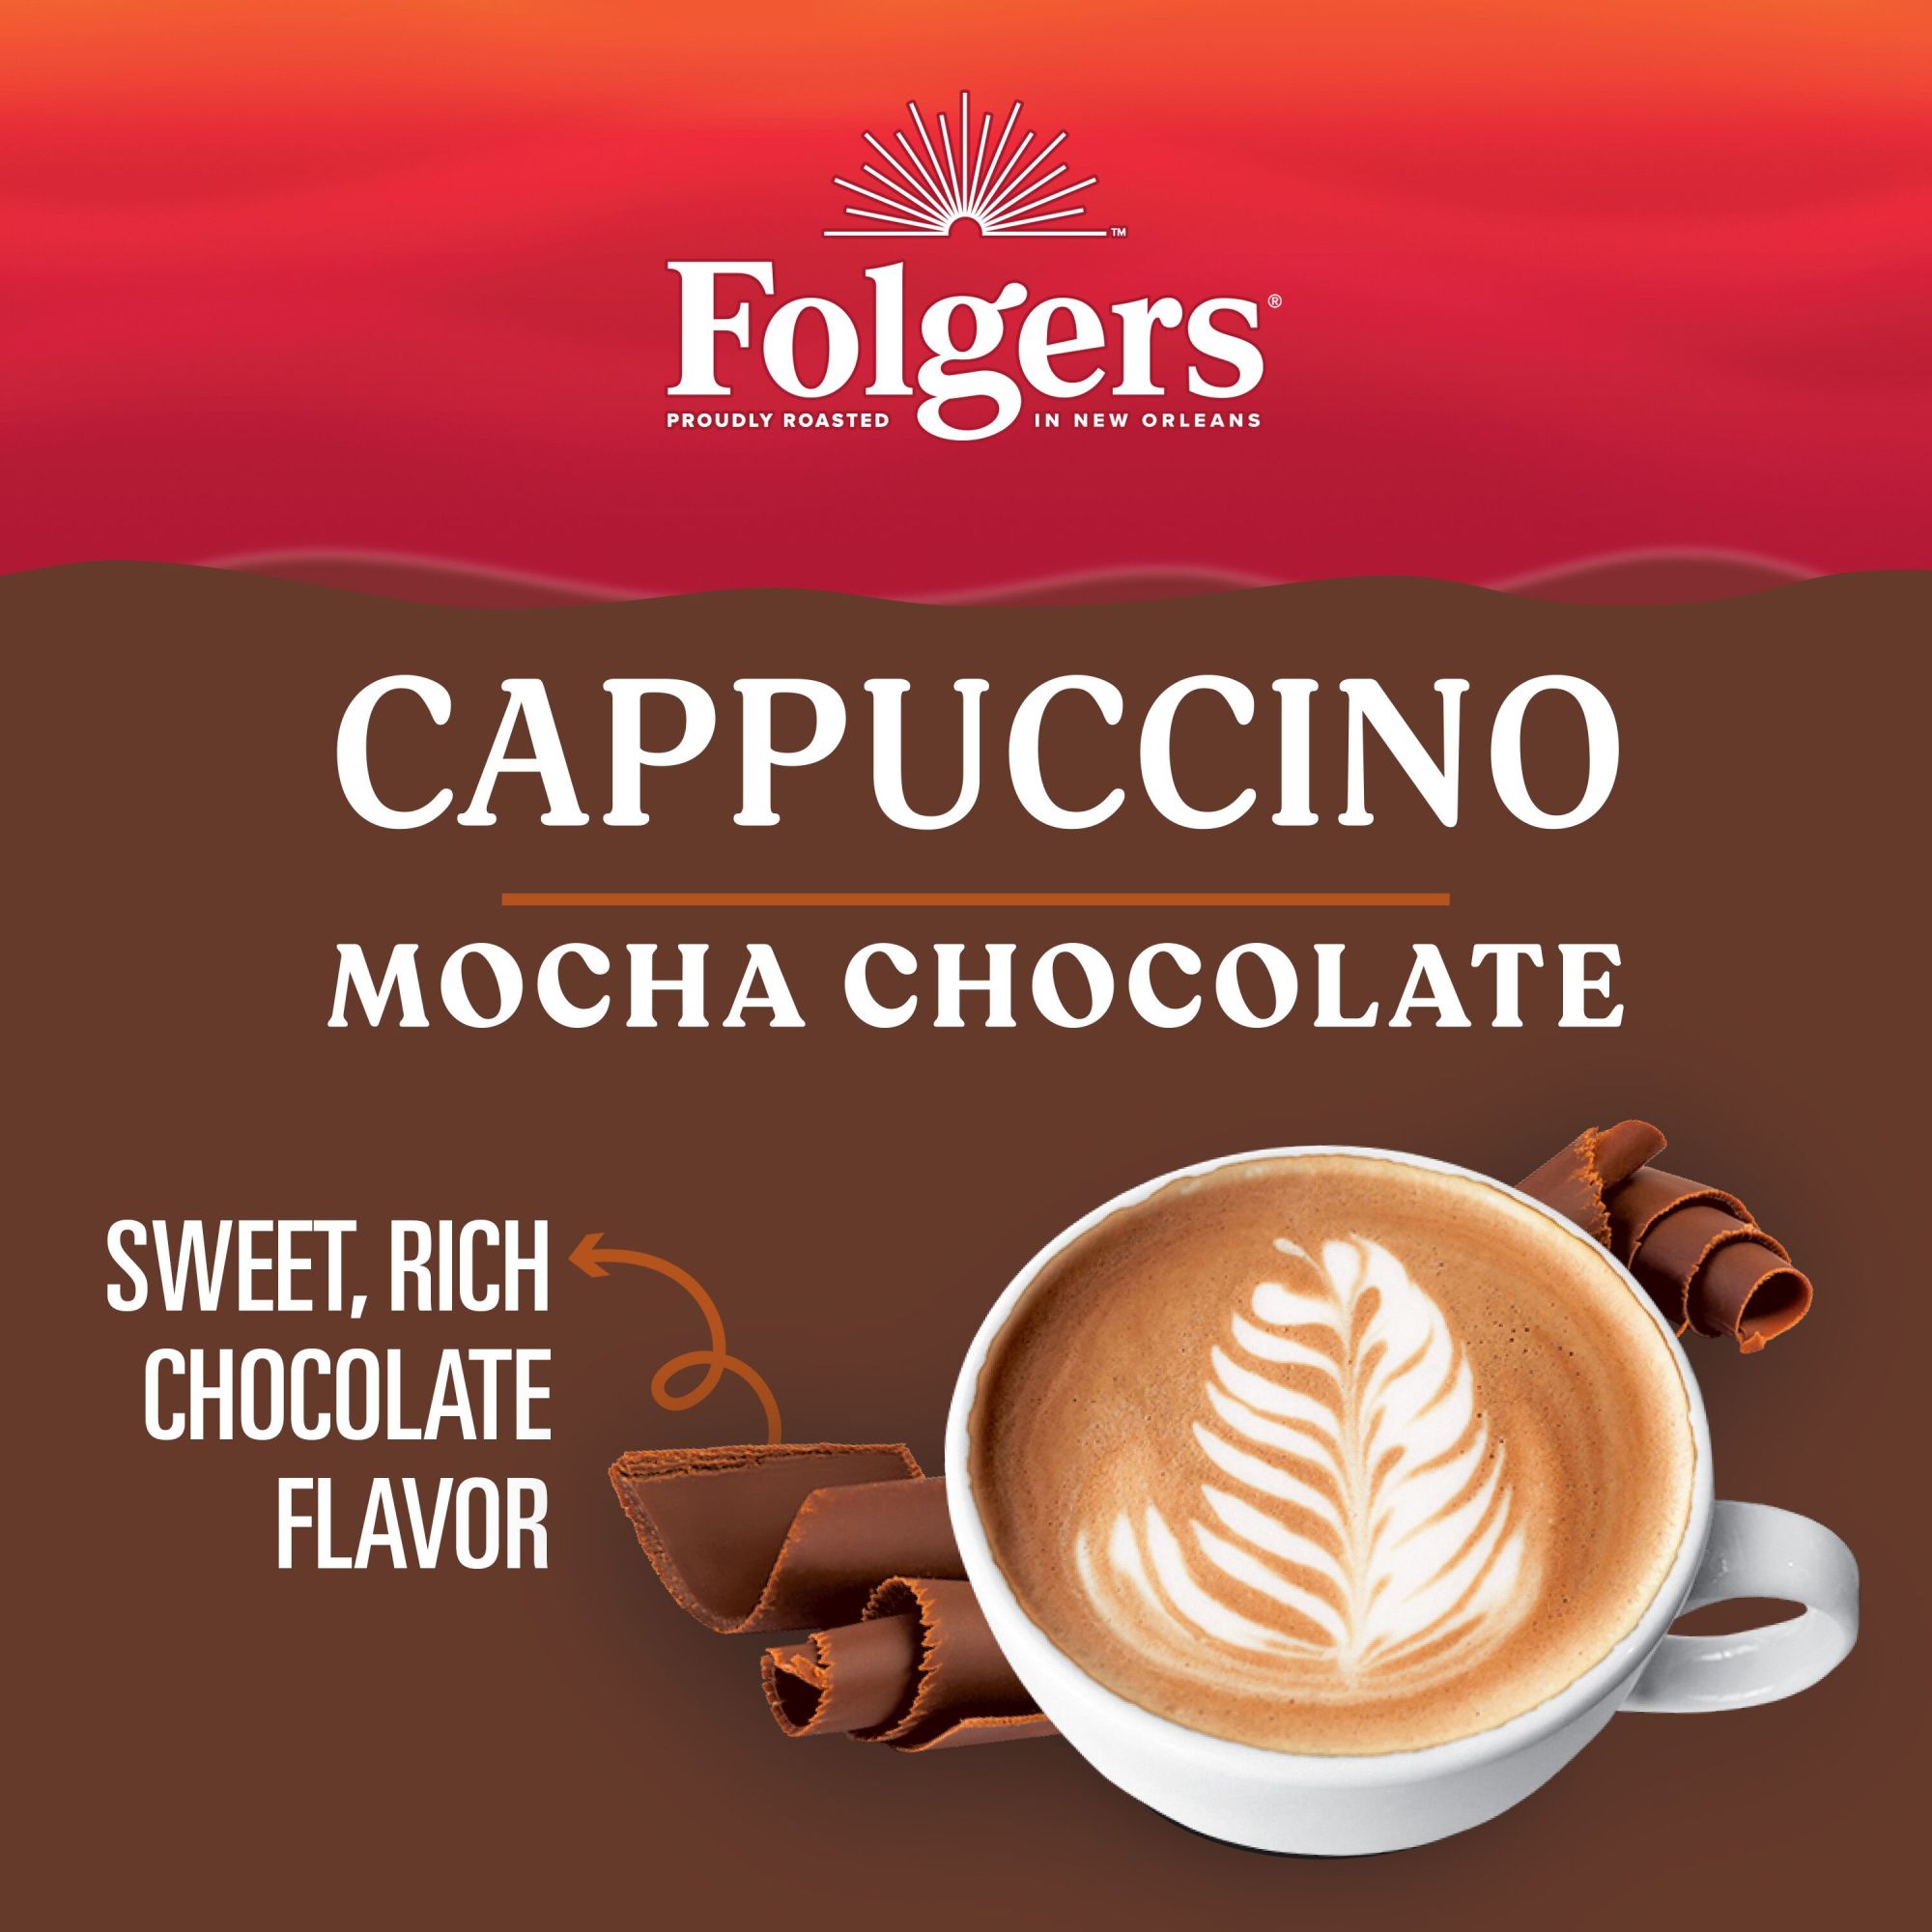 Folgers Mocha Chocolate Flavored Cappuccino Mix, Instant Coffee Beverage, 16-Ounce Canister - image 5 of 9